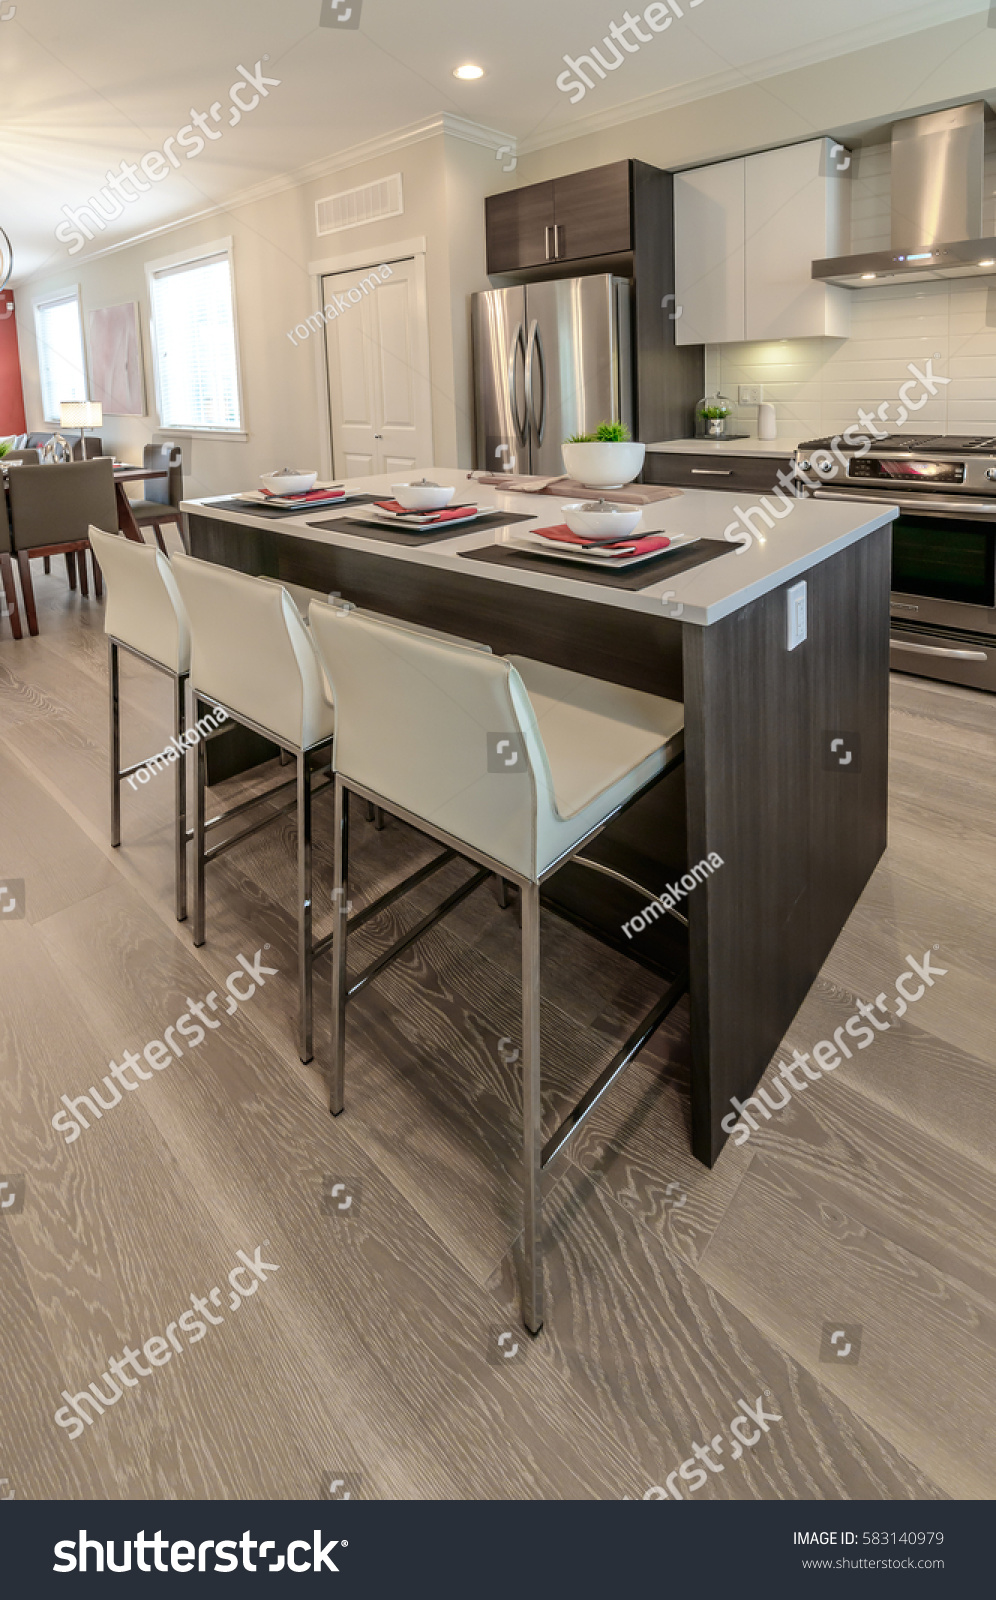 Nicely Decorated Kitchen Counter Table Iceland Stock Photo Edit Now 583140979